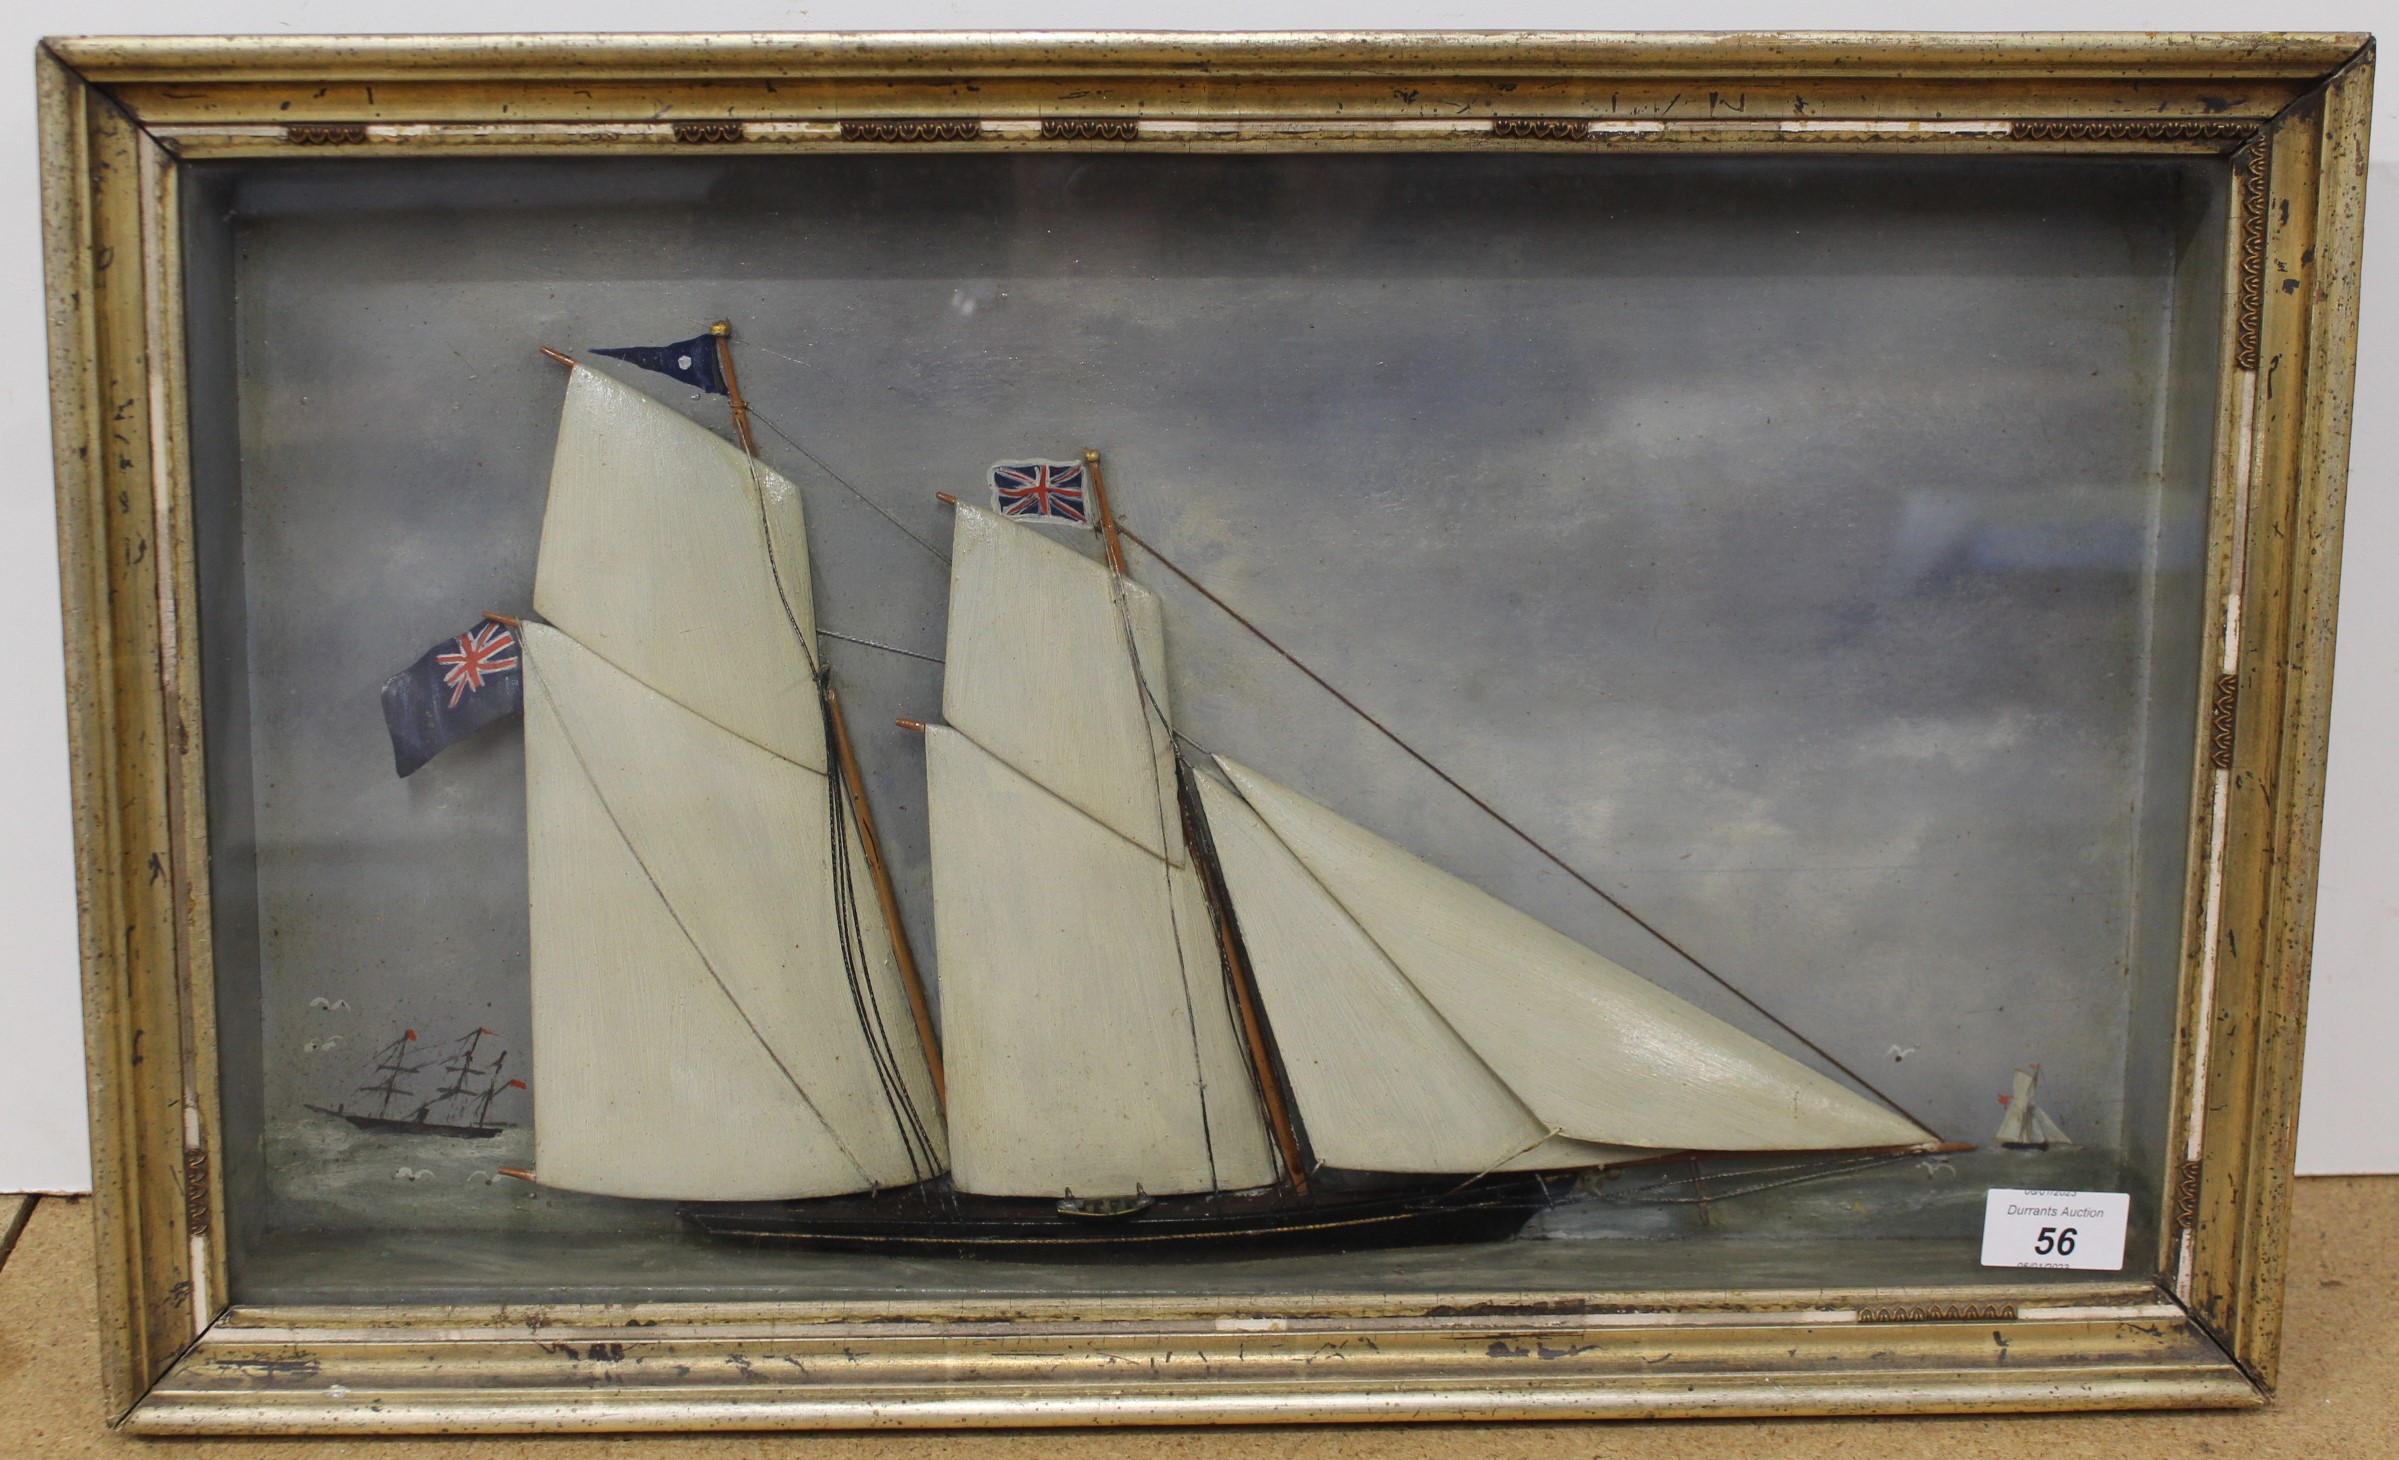 A 19th Century framed and glazed painted wooden half model of a ship in full sail against a painted